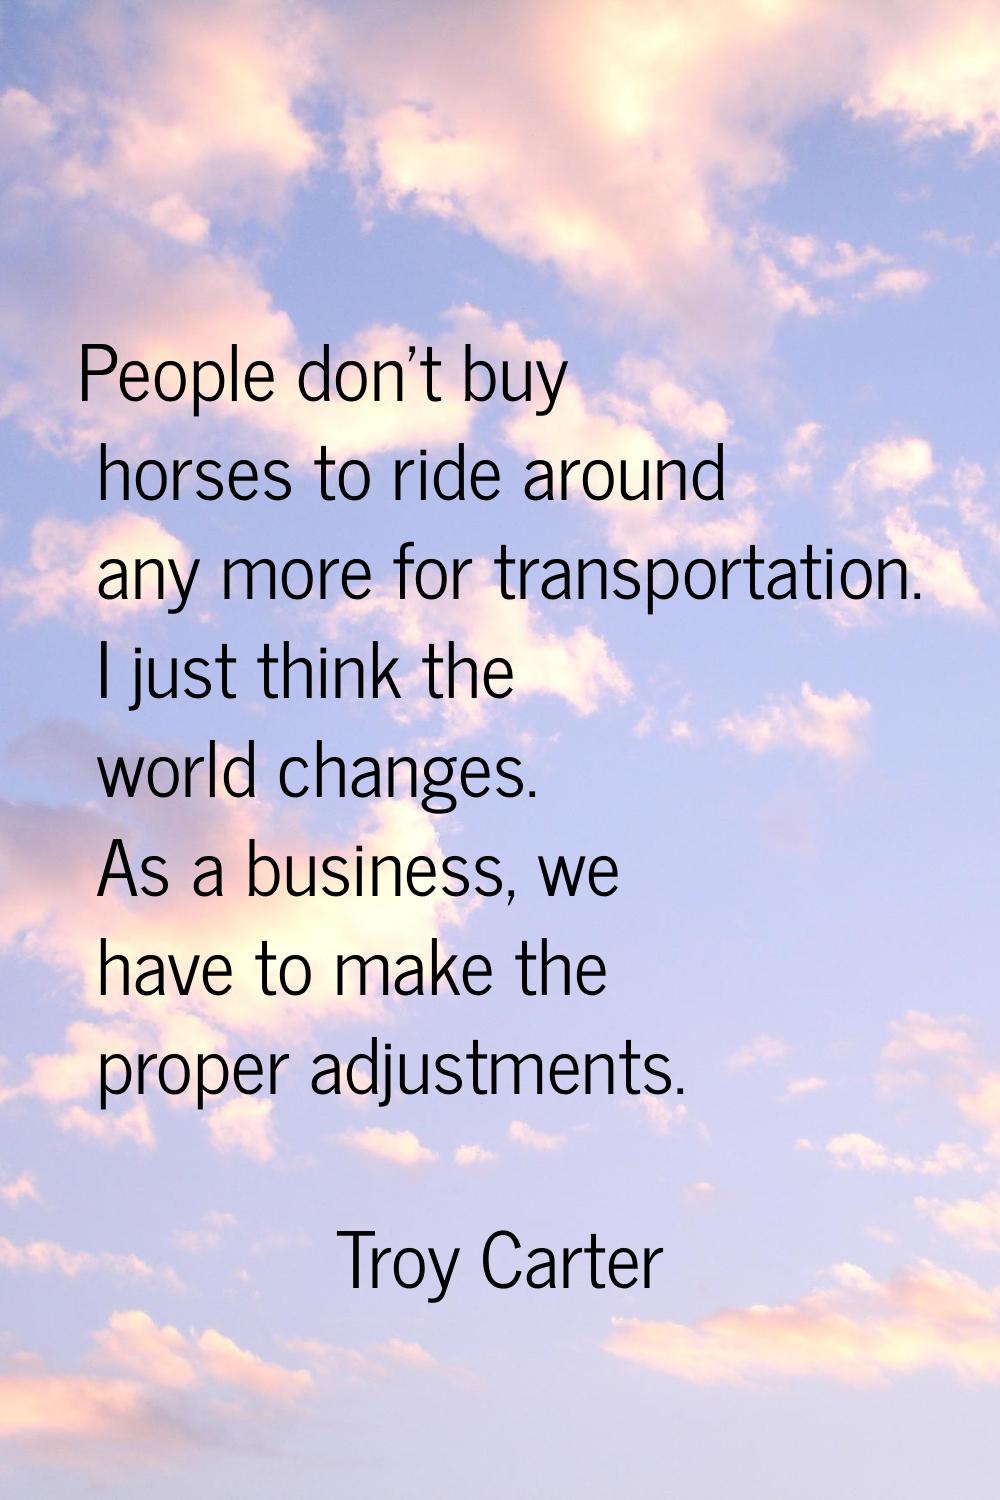 People don't buy horses to ride around any more for transportation. I just think the world changes.